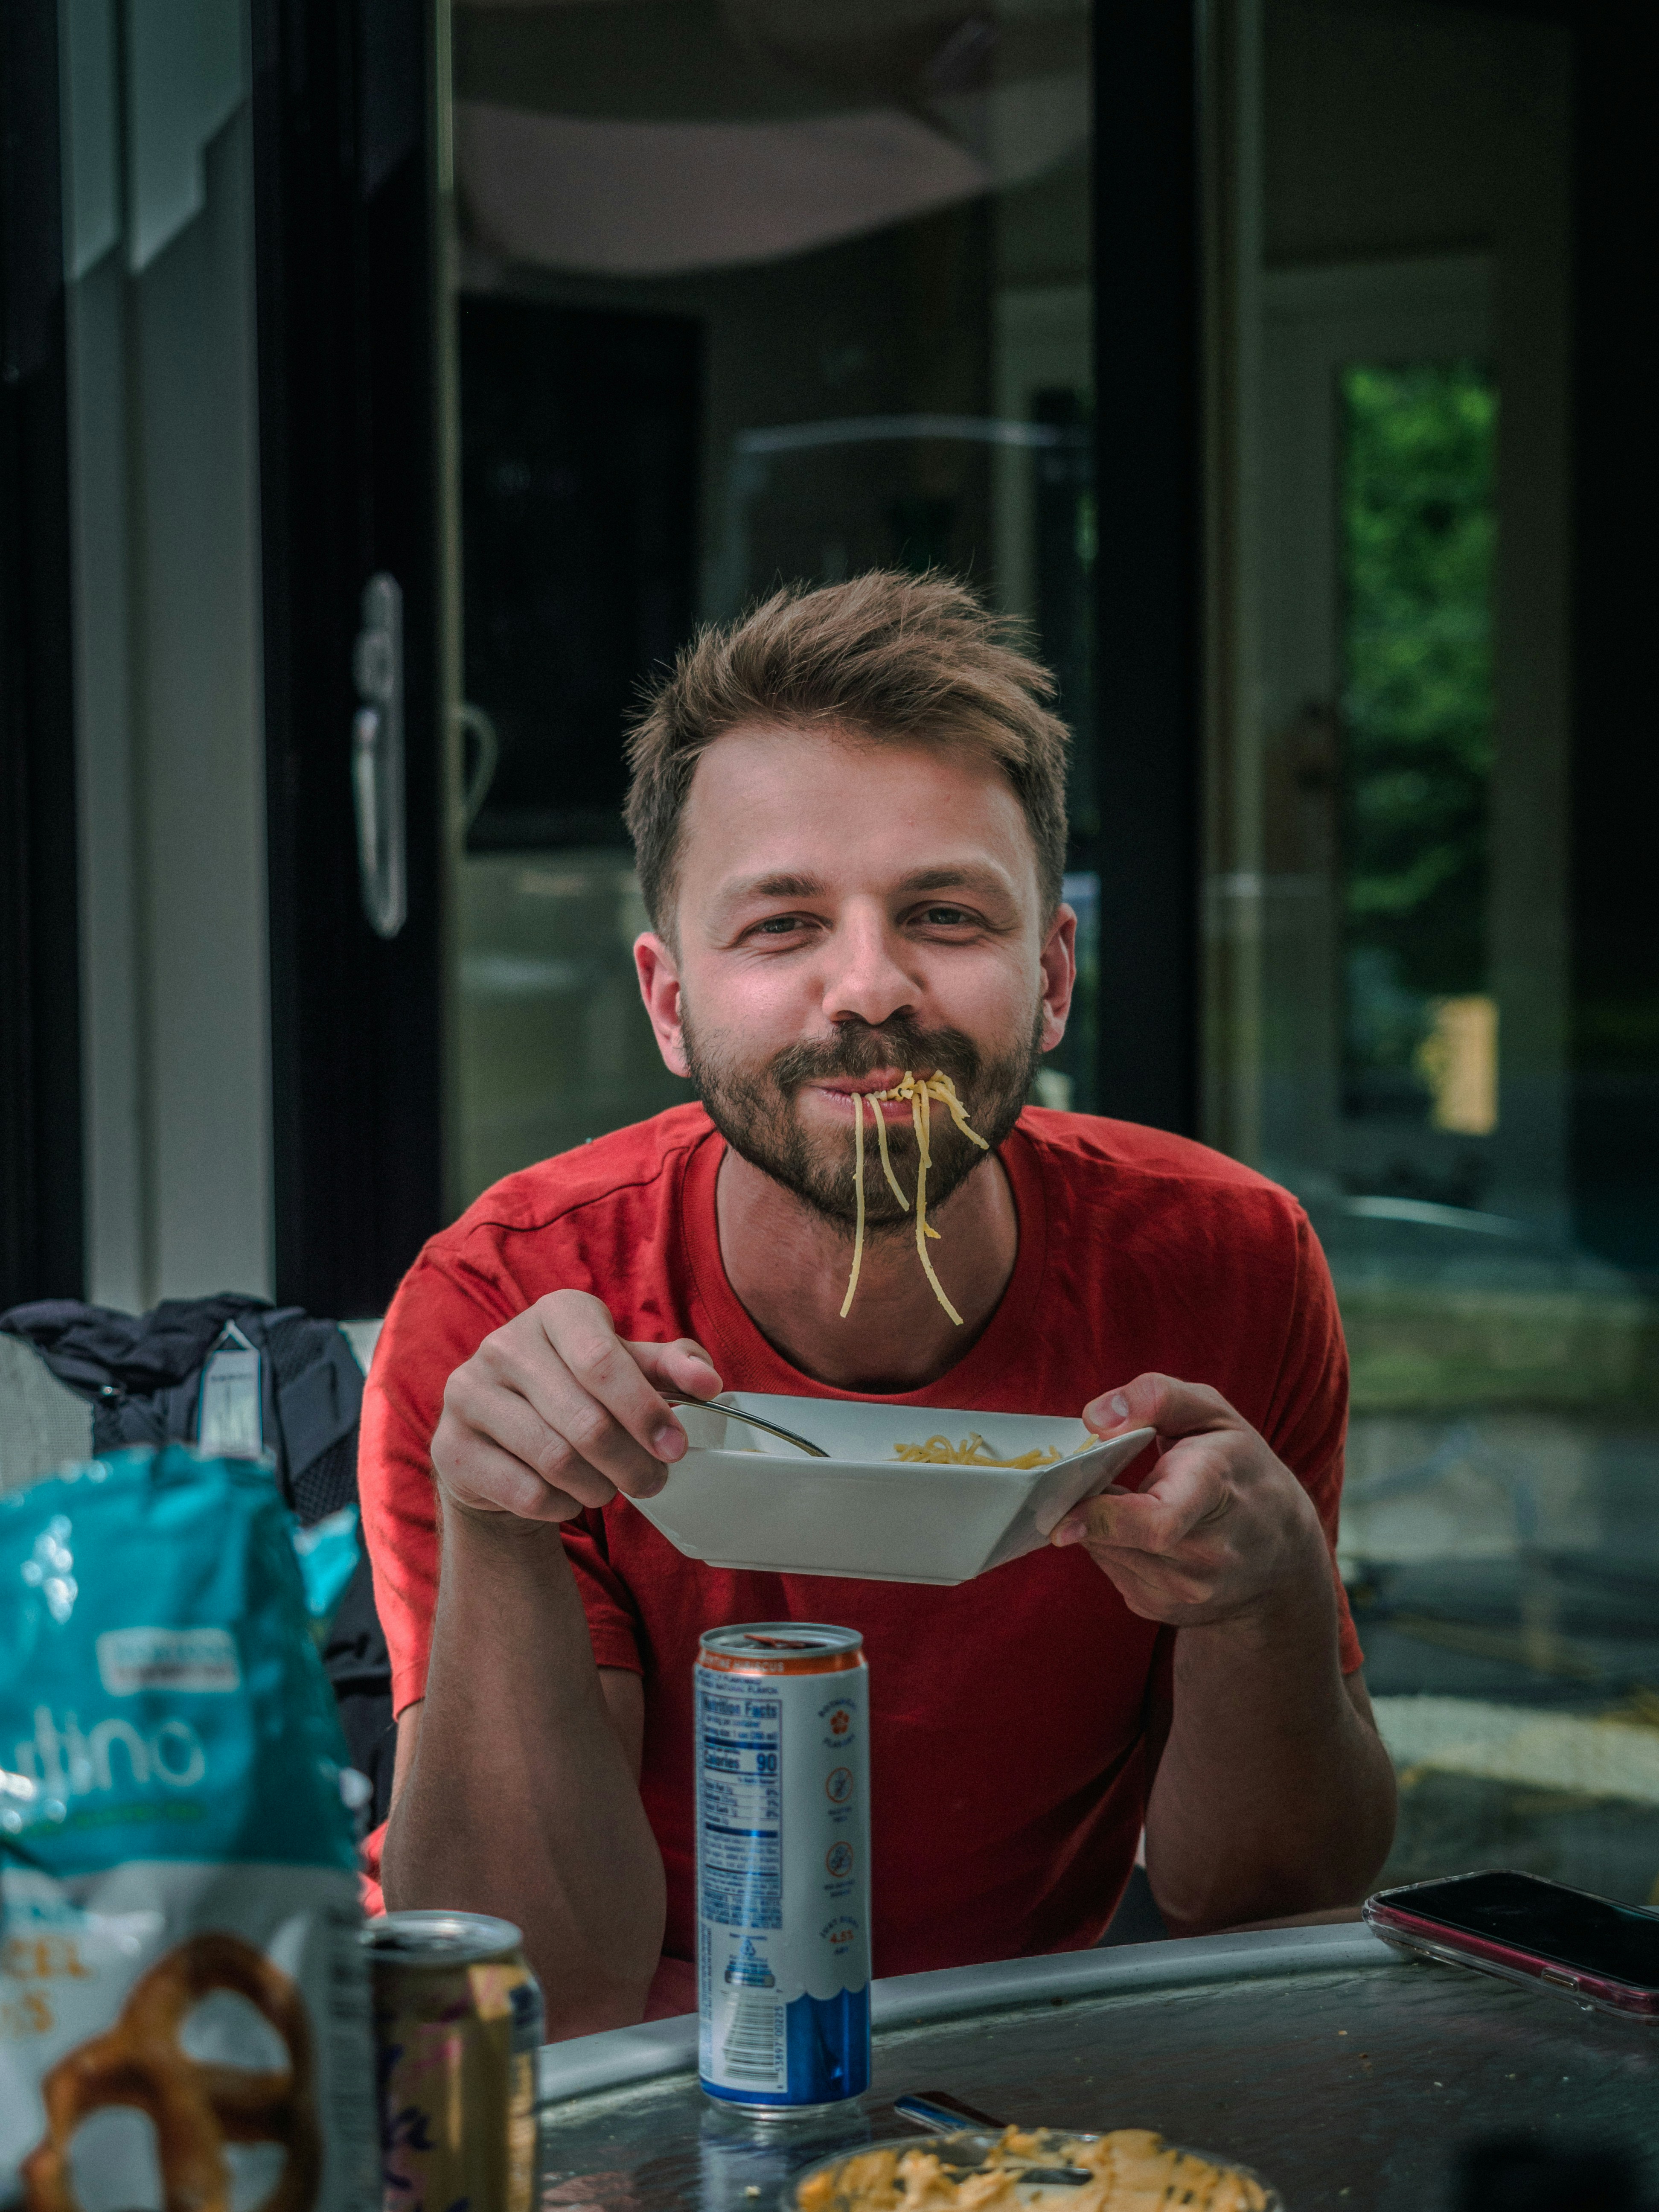 great photo recipe,how to photograph a guy eating pasta. ; man in red crew neck t-shirt holding white and red labeled can